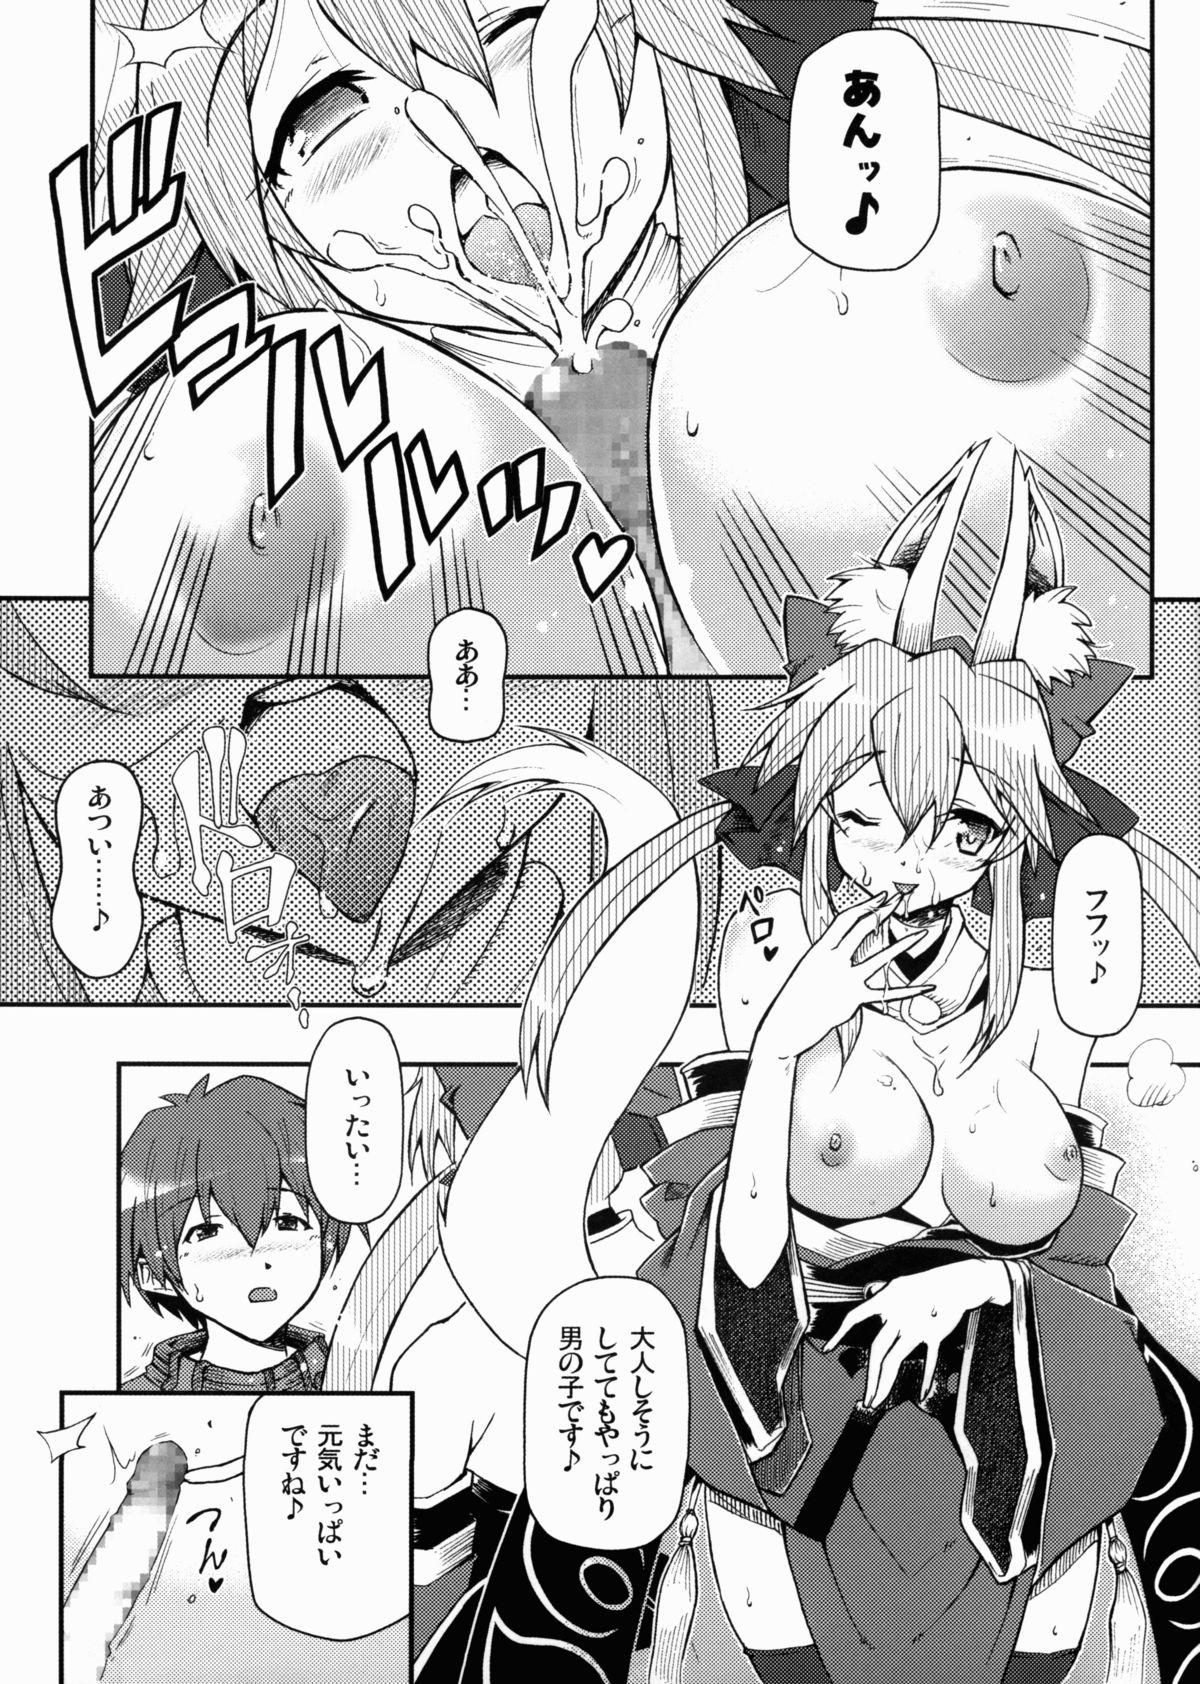 Innocent 21st CENTURY FOX - Fate extra Facefuck - Page 10